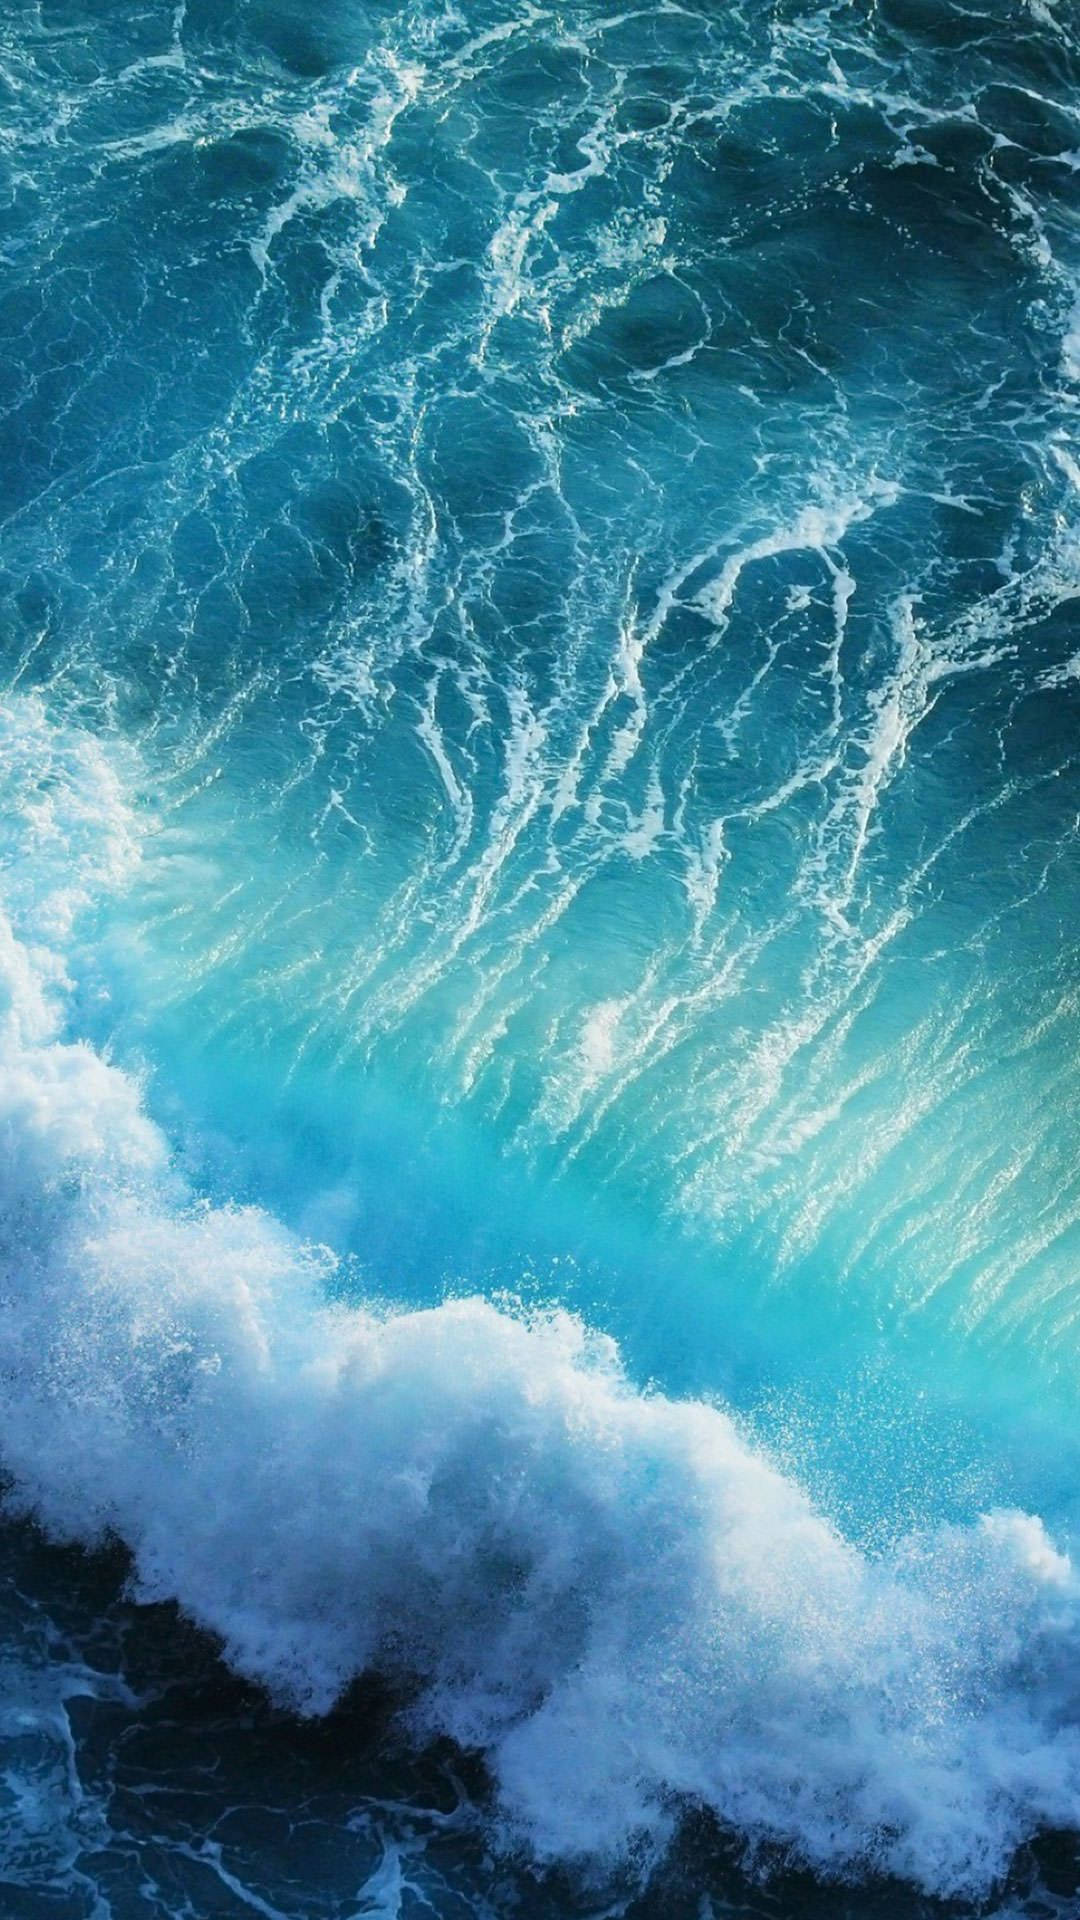 A Blue Wave Crashing Into The Ocean Background